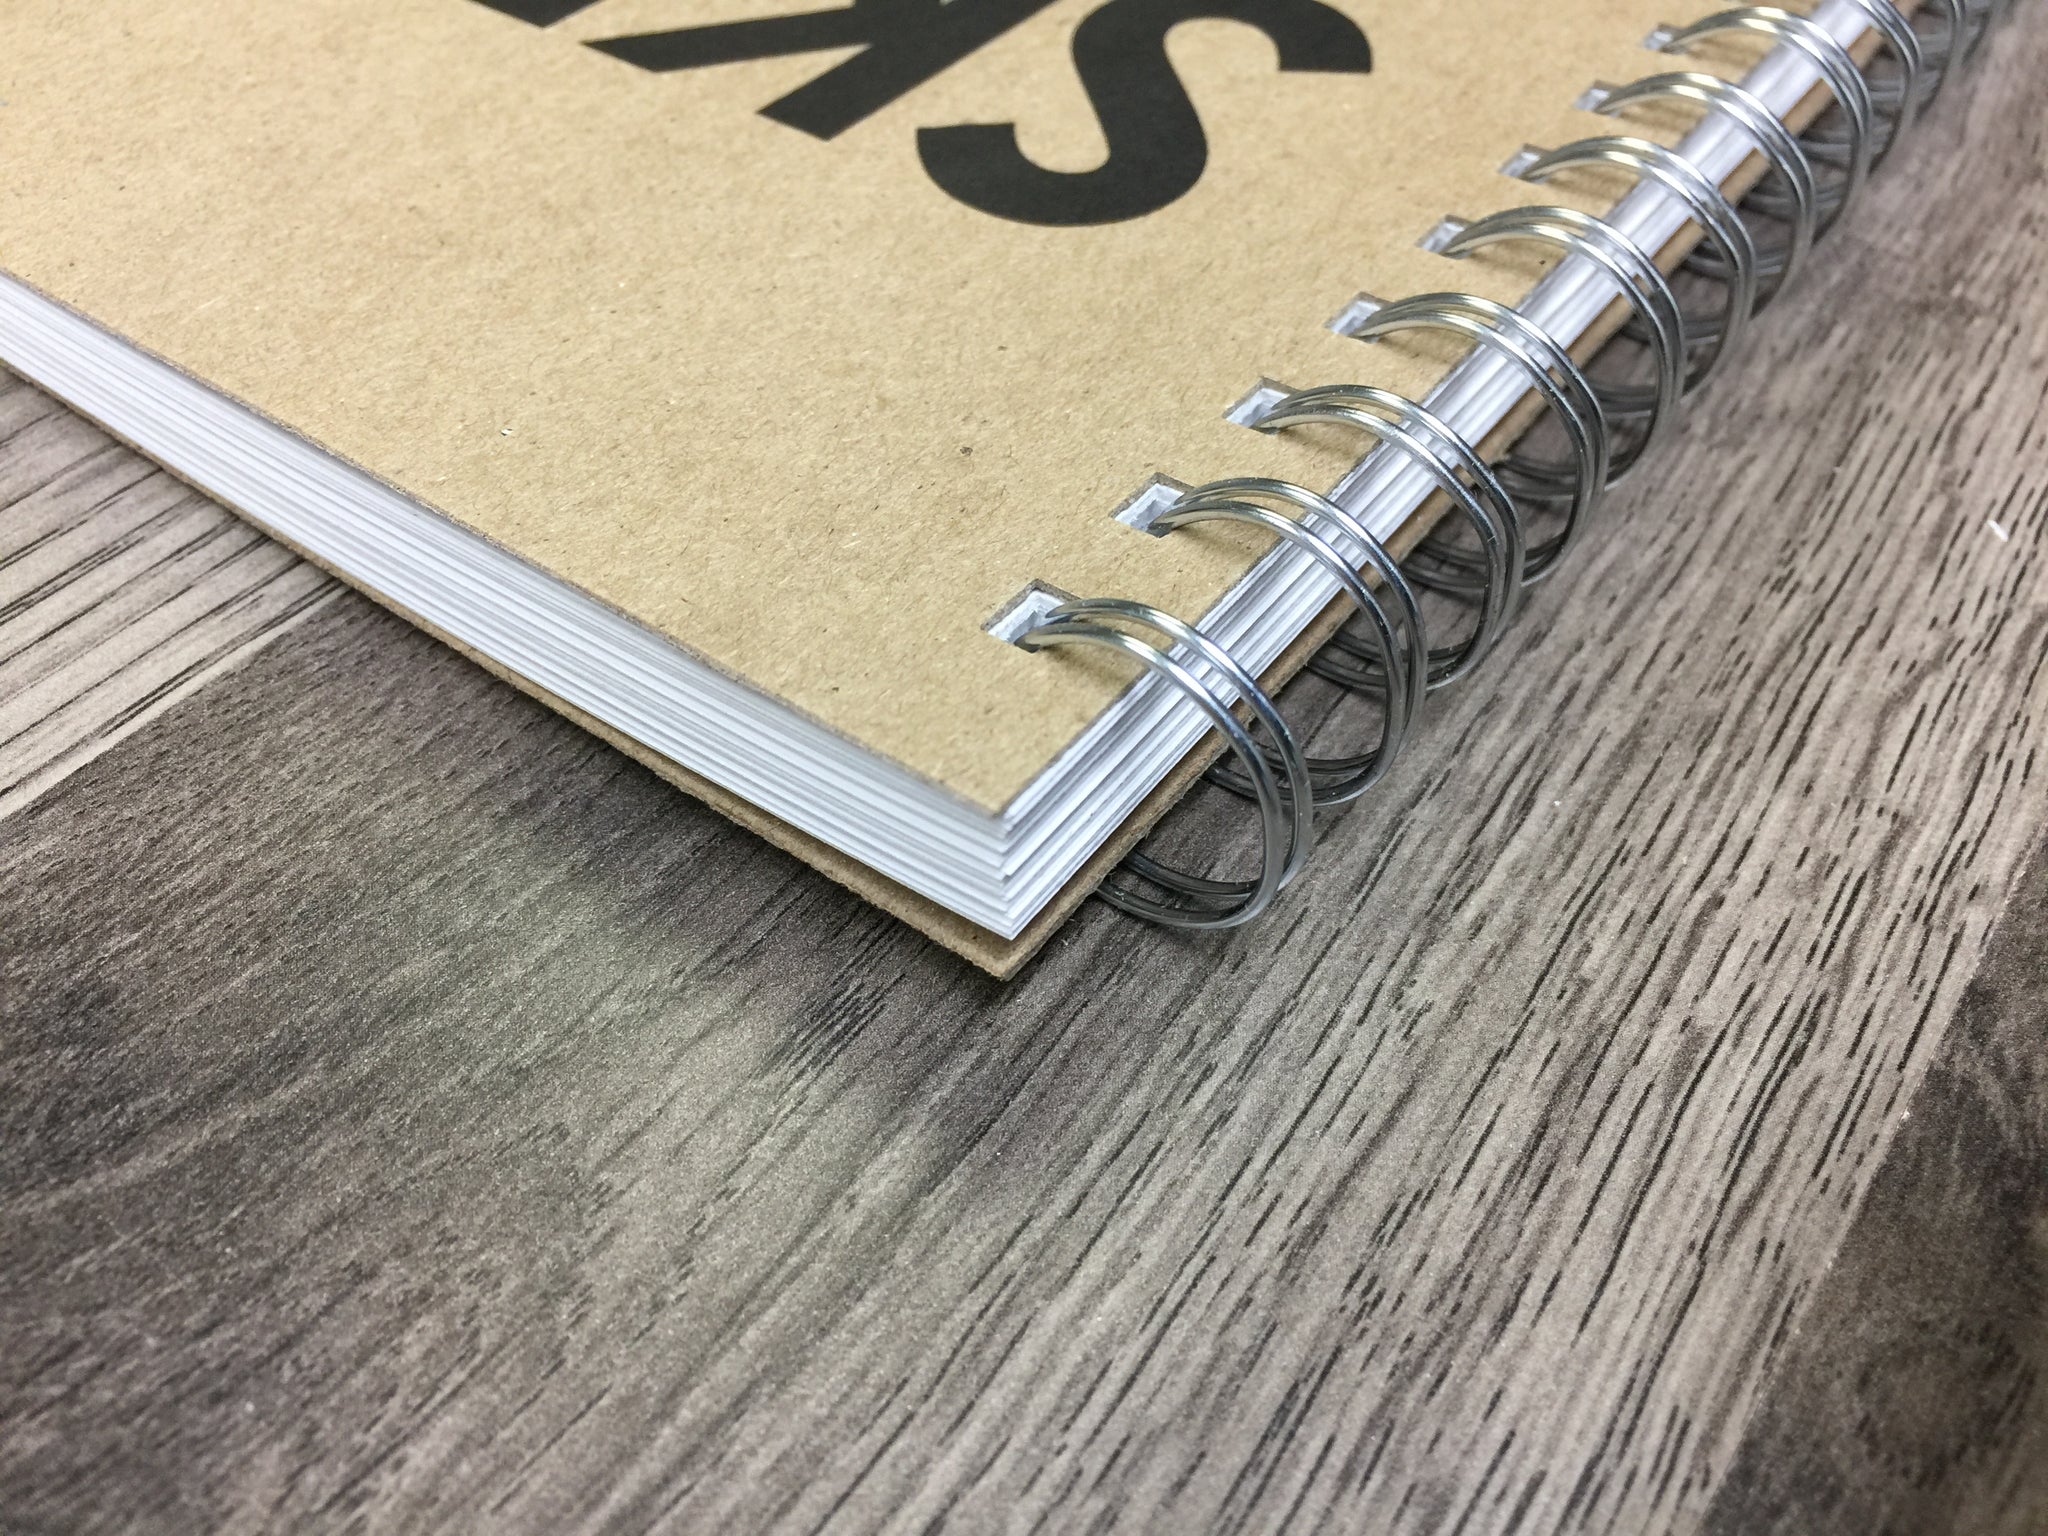 LAY FLAT sketchbook. Removable sheet, journal style DRAW book. Multi-m –  Design Ideation Studio